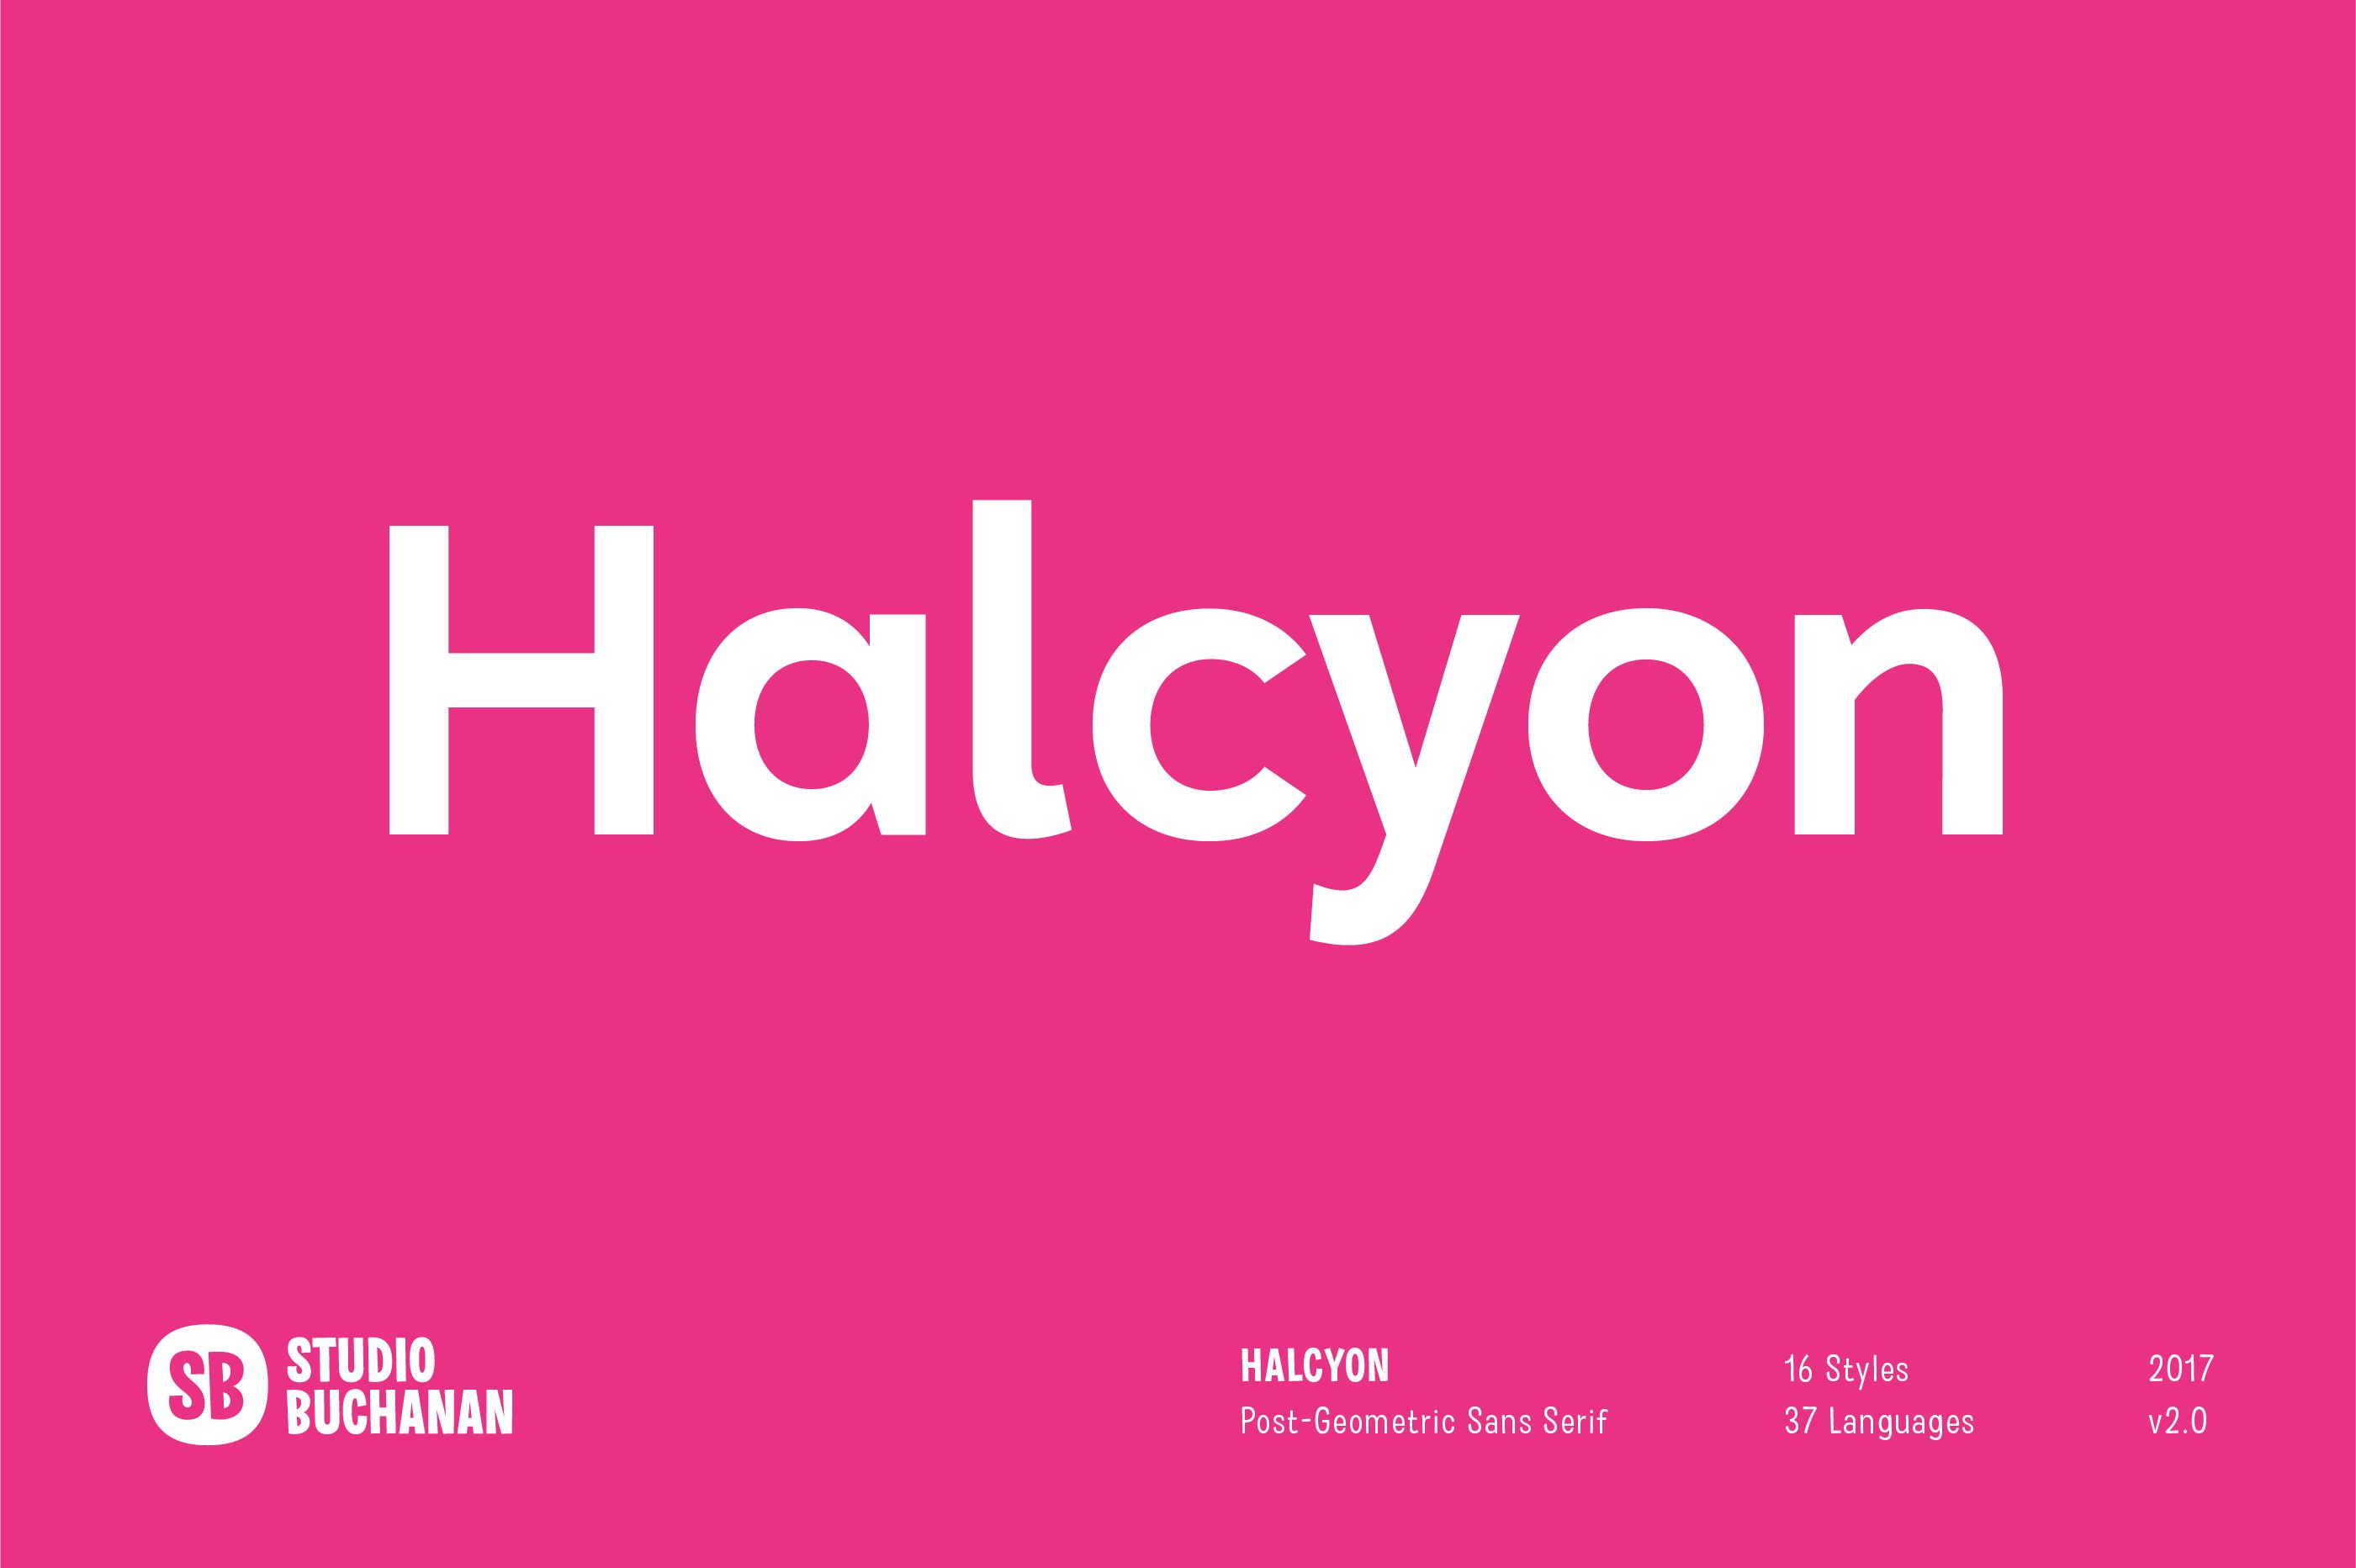 Halcyon cover image.